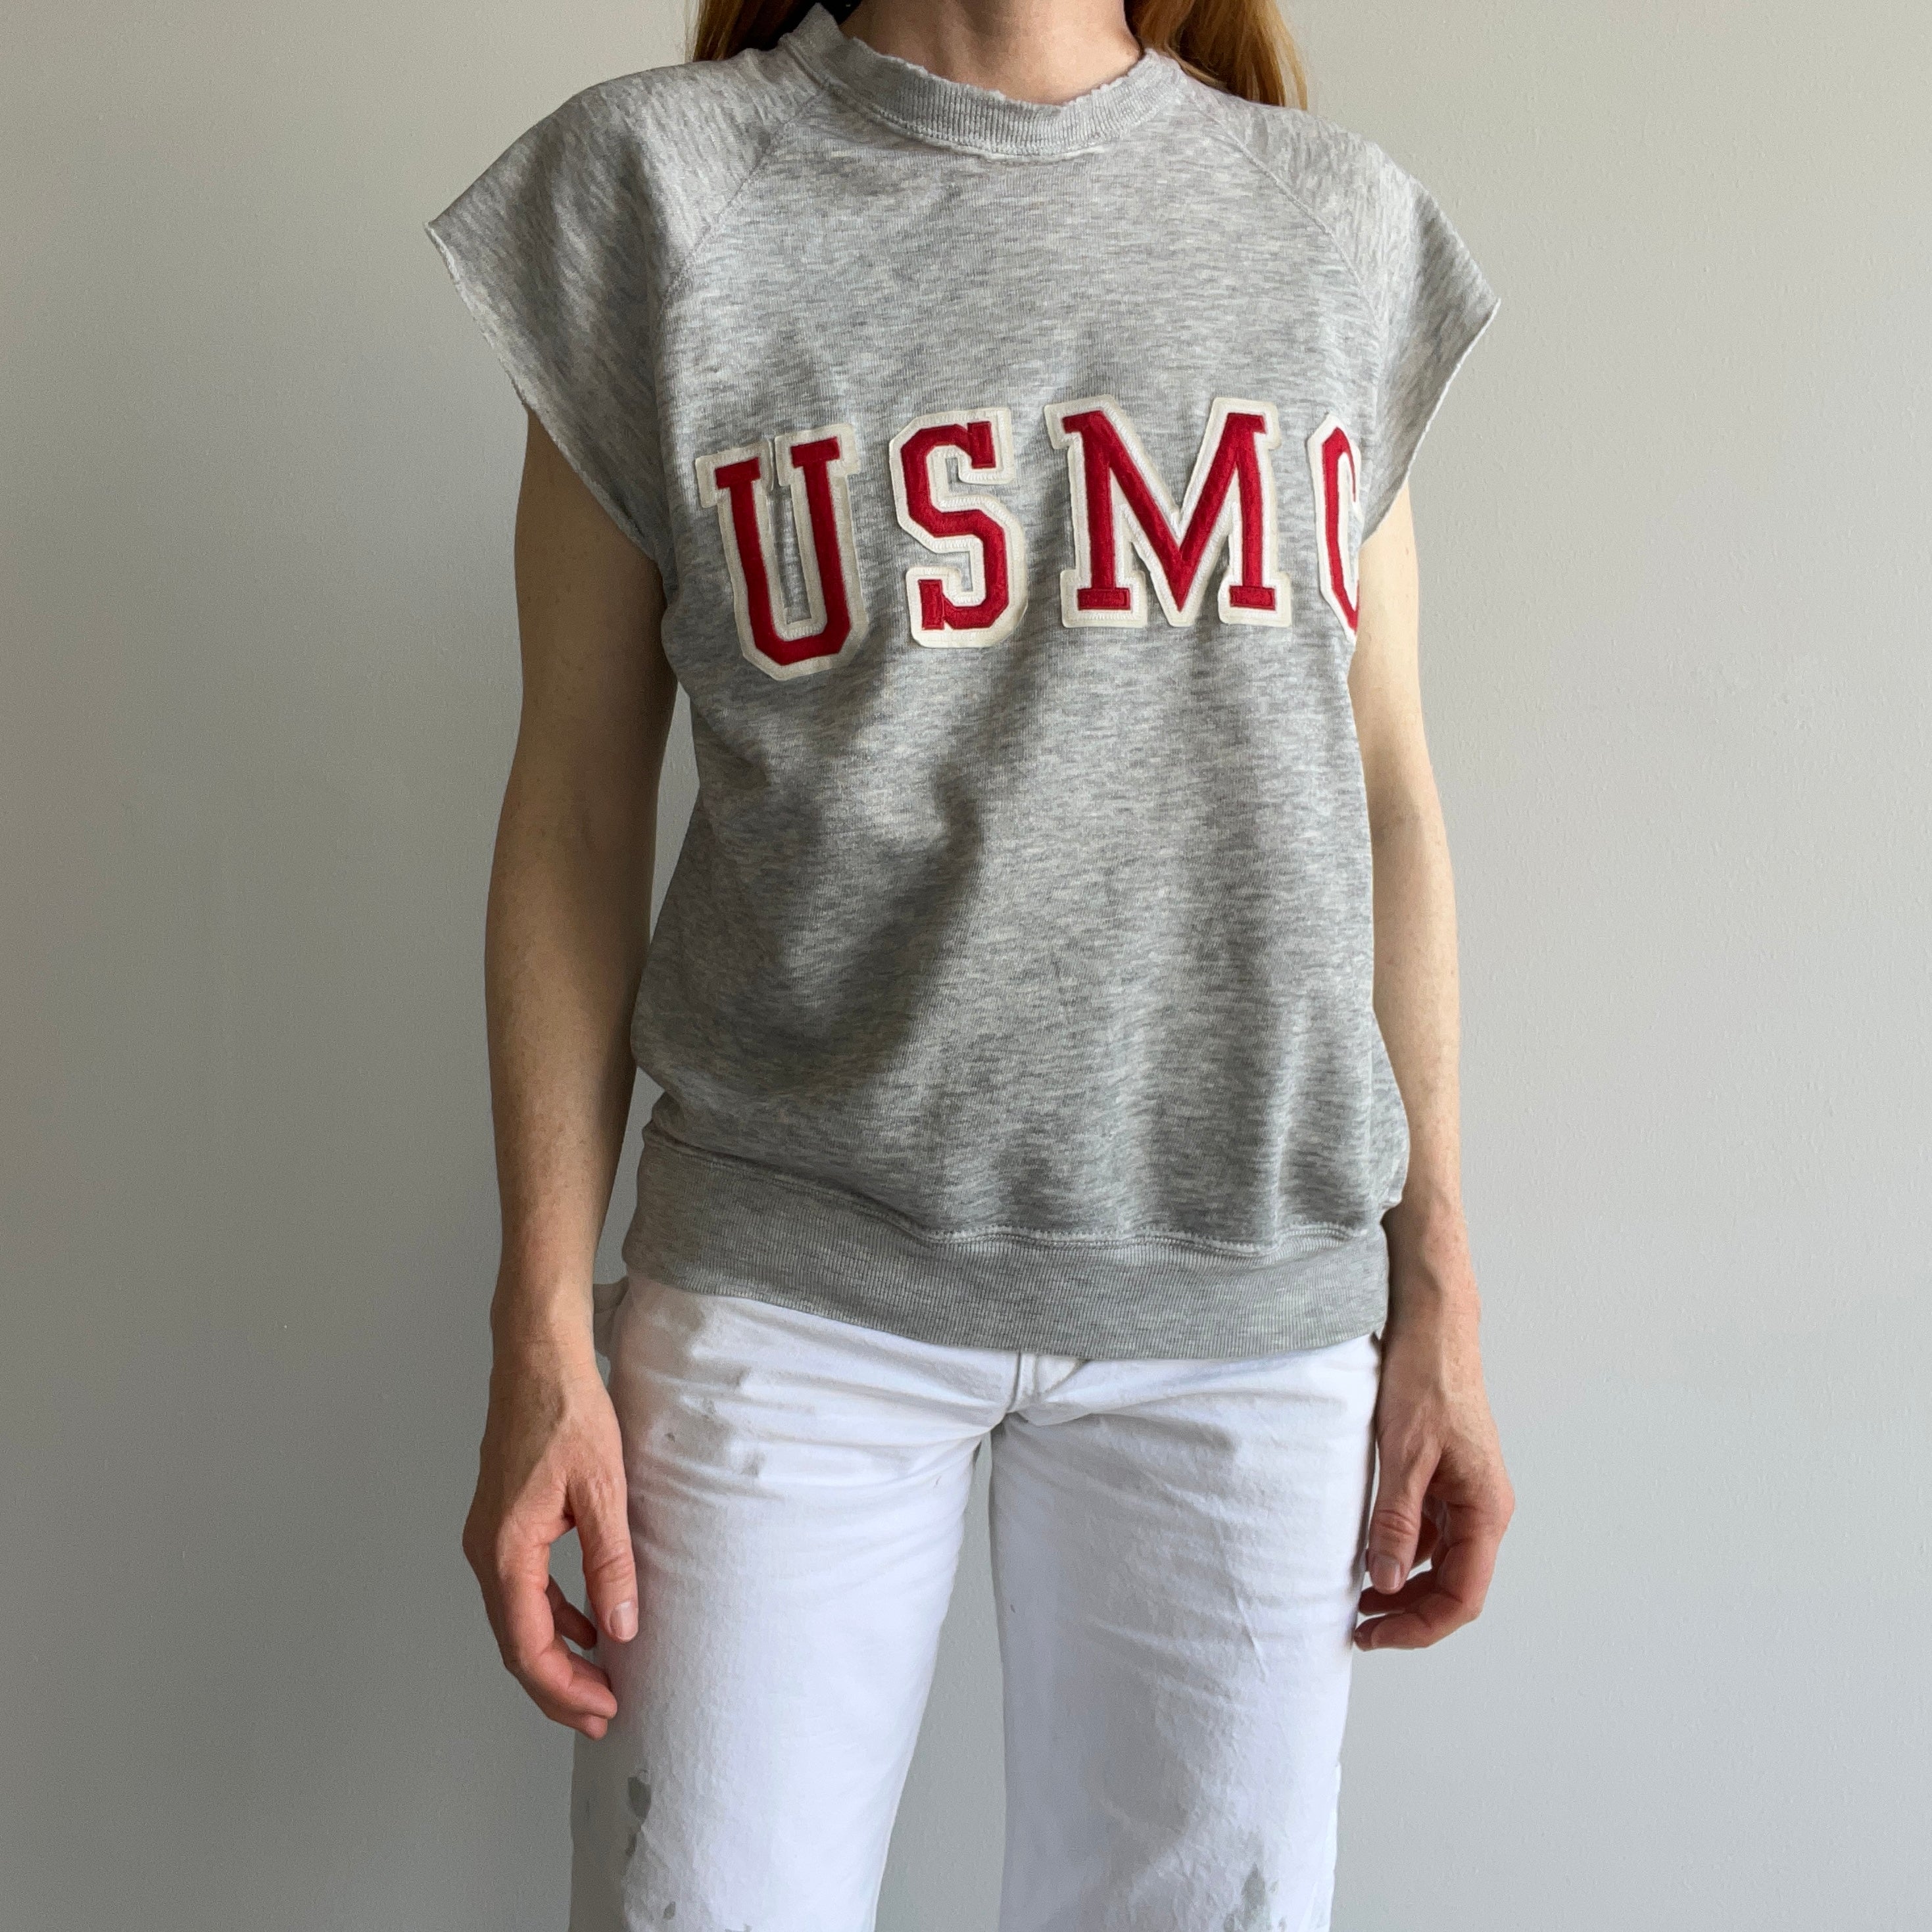 1980s USMC Thinned Out and Worn Short Sleeve Sweatshirt